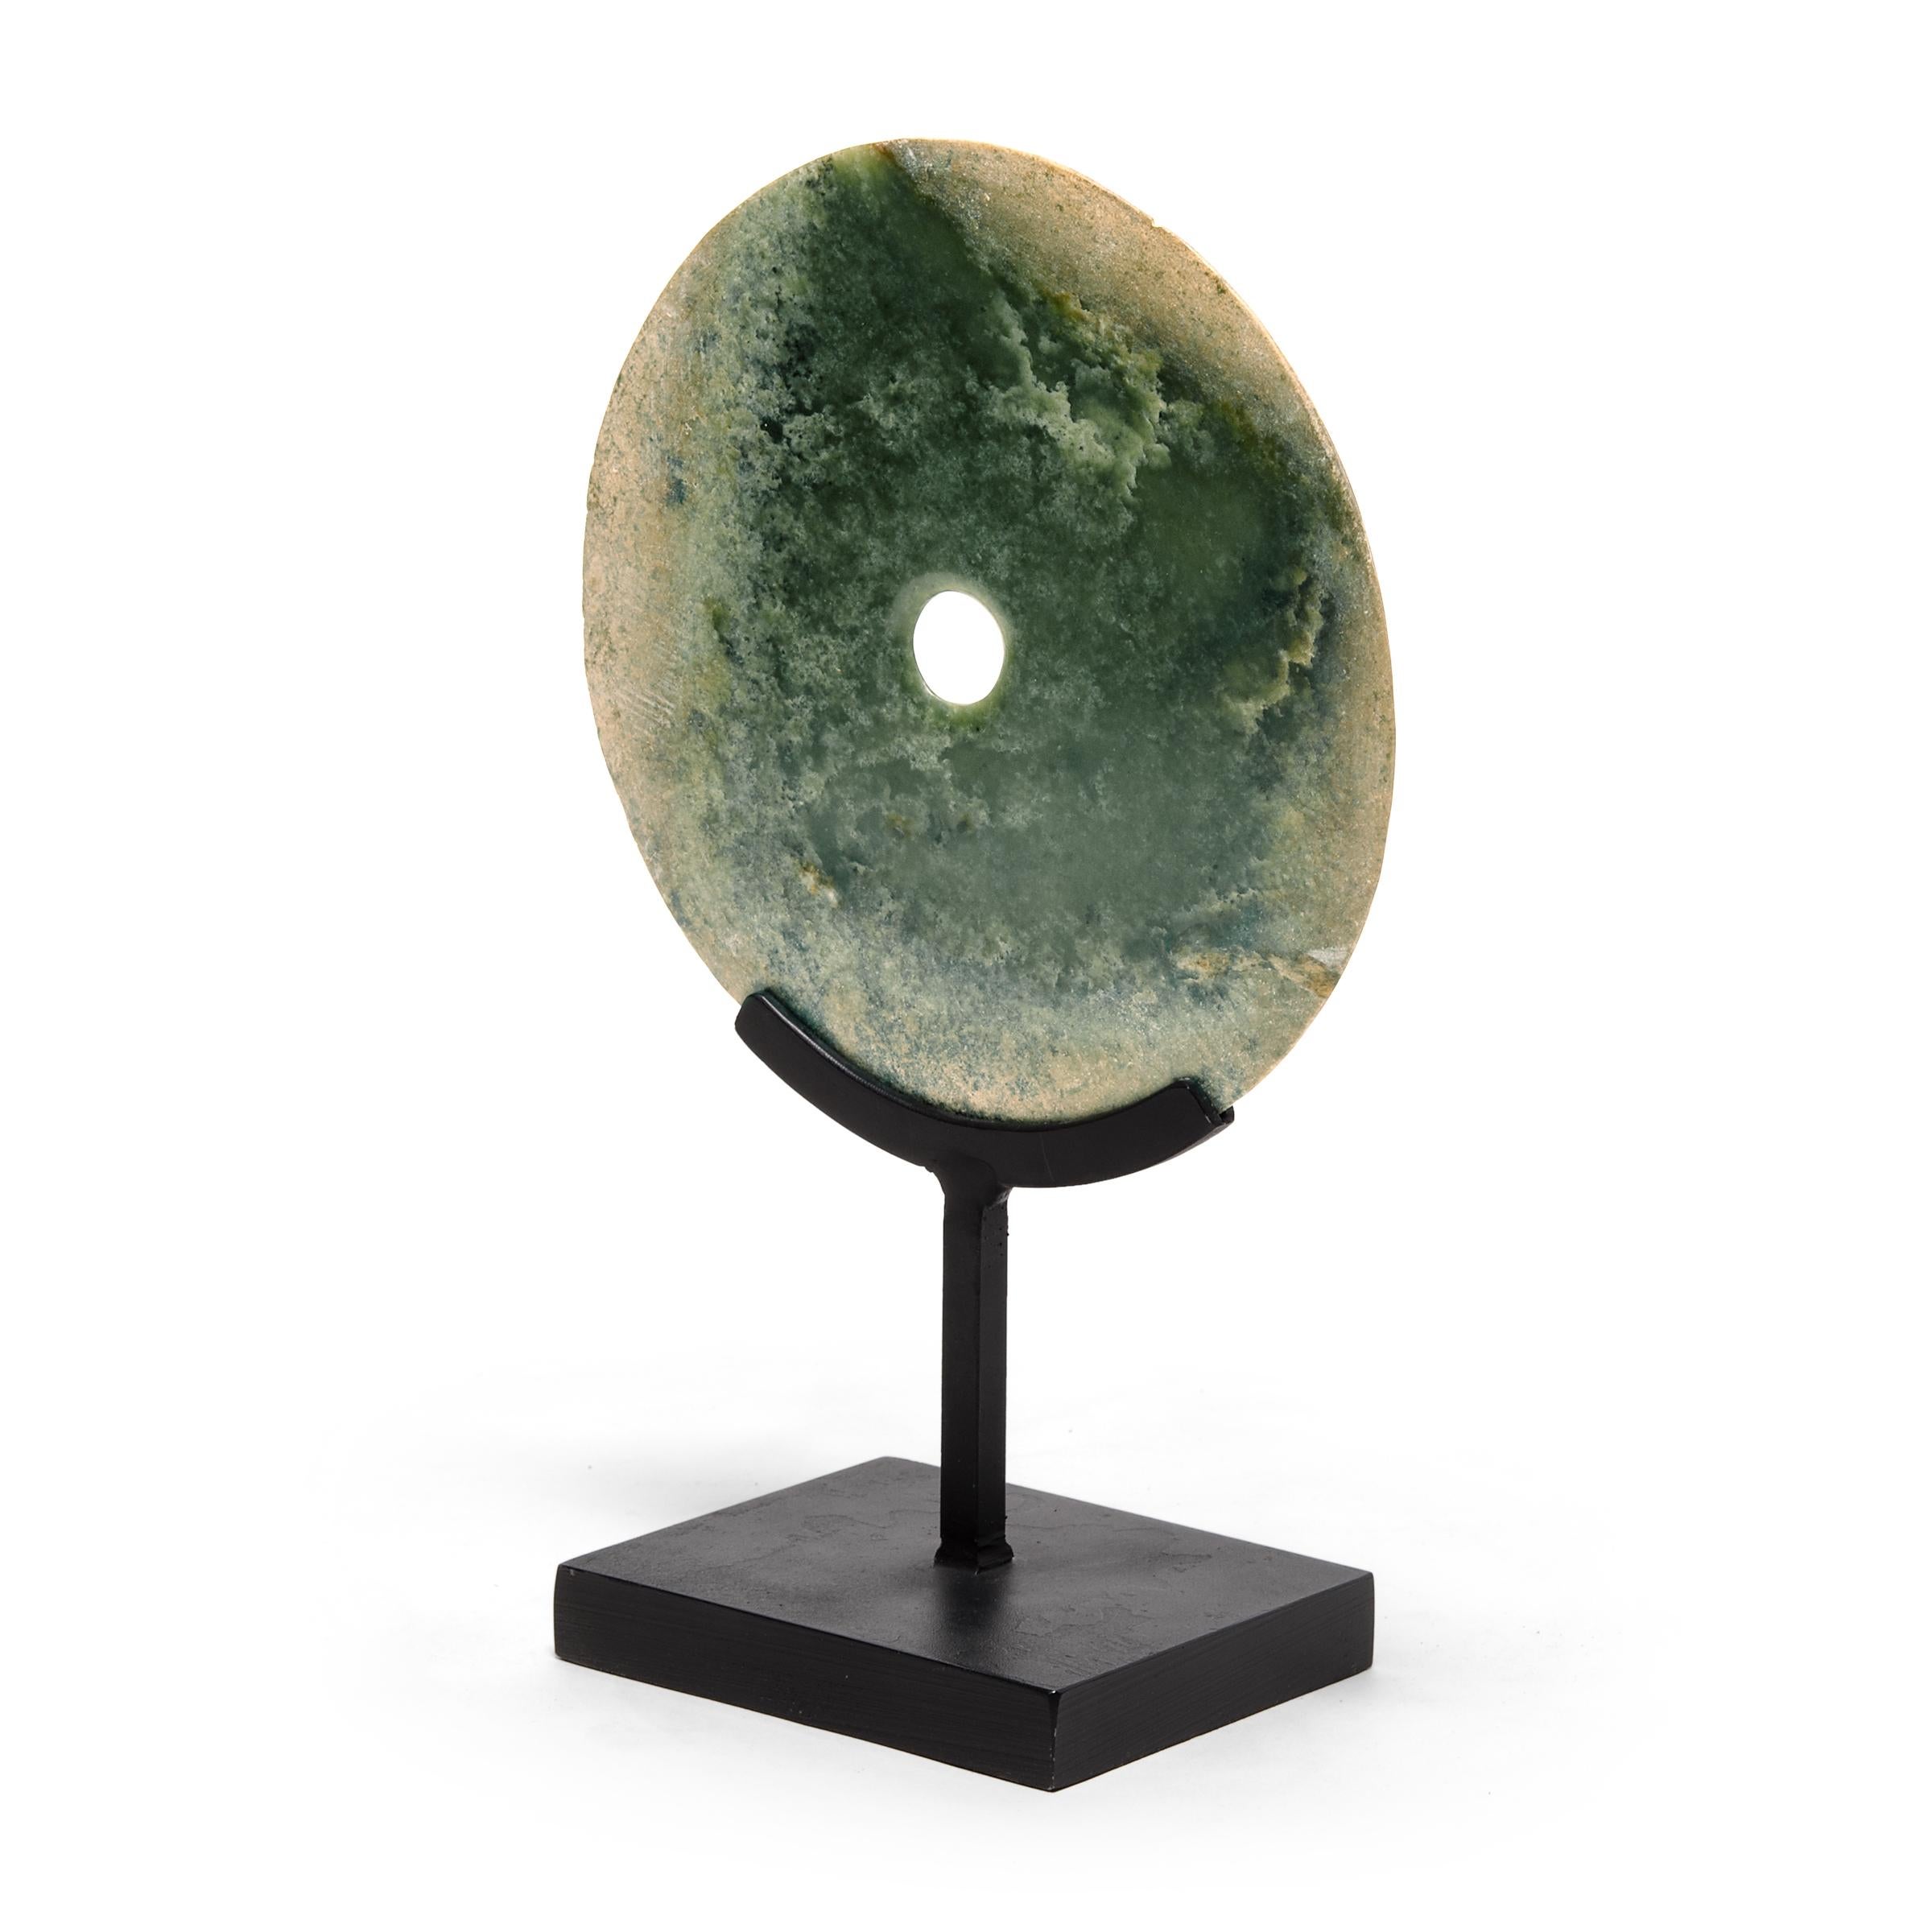 Subtly contrasting jade occlusions give this round bi disc a certain celestial quality, like a full moon obscured by darkened clouds. Found in the tombs of ancient Chinese emperors and aristocrats, bi discs such as this have a mysterious and